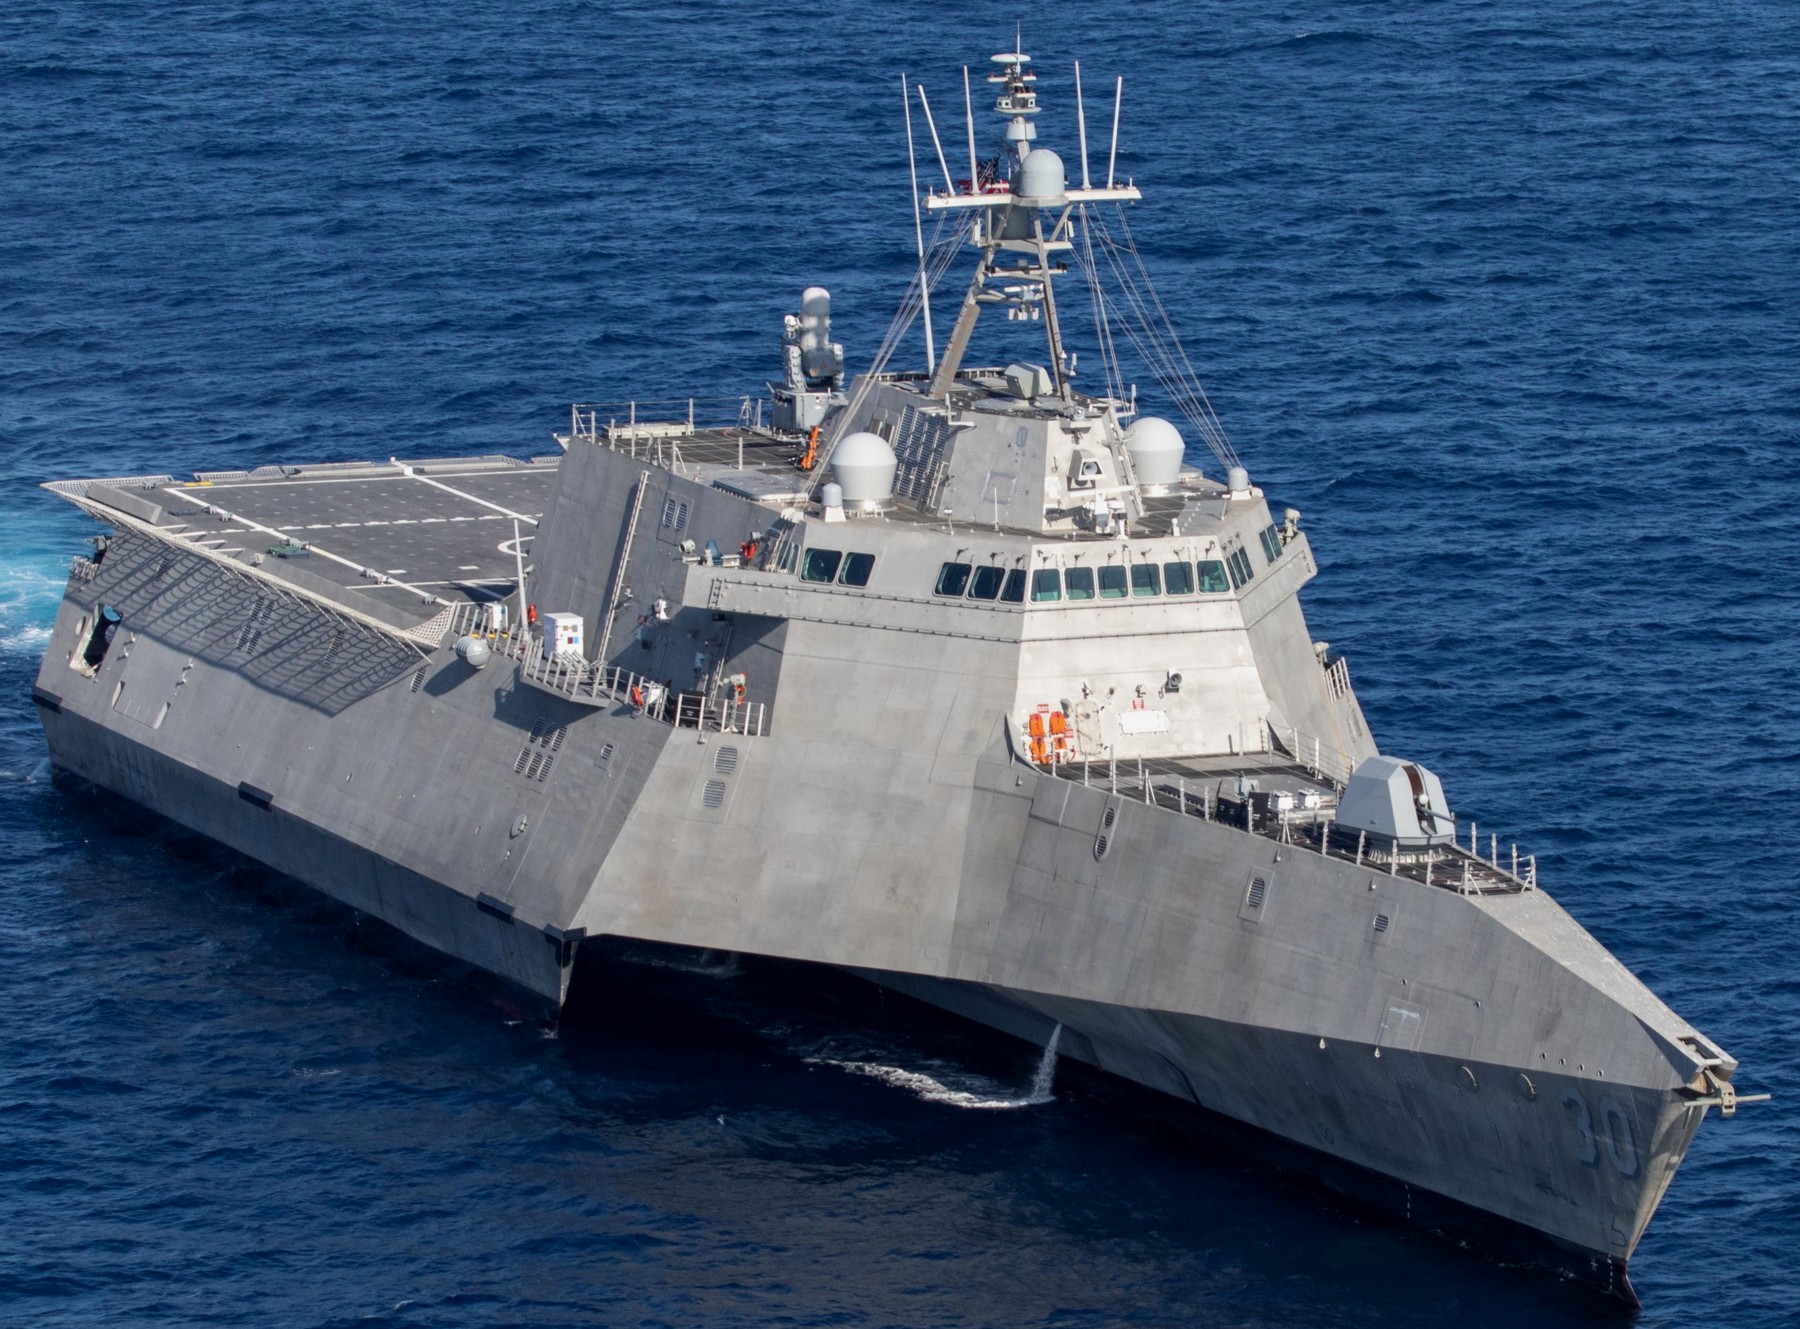 lcs-30 uss canberra littoral combat ship independence class us navy 24